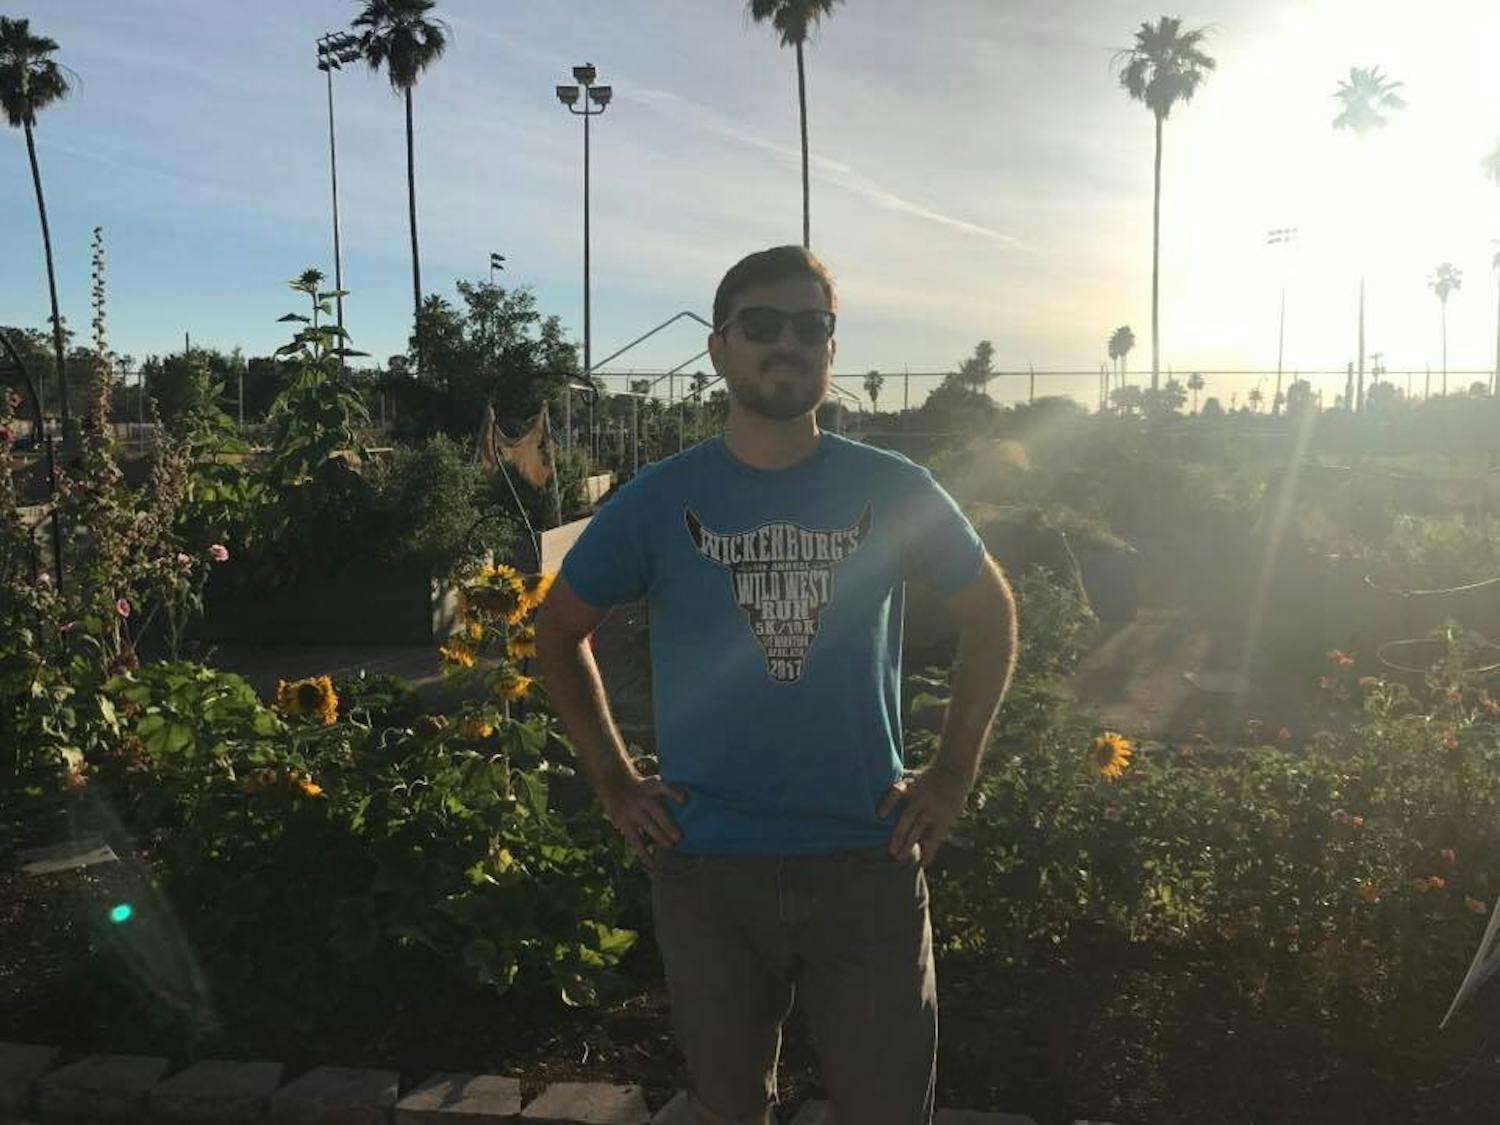 Mauricio Suchowlansky, postdoctoral fellow from ASU's Center for Political Thought & Leadership, poses for a photo&nbsp;on May 23, 2017 at Clark Park Farmers Market.&nbsp;